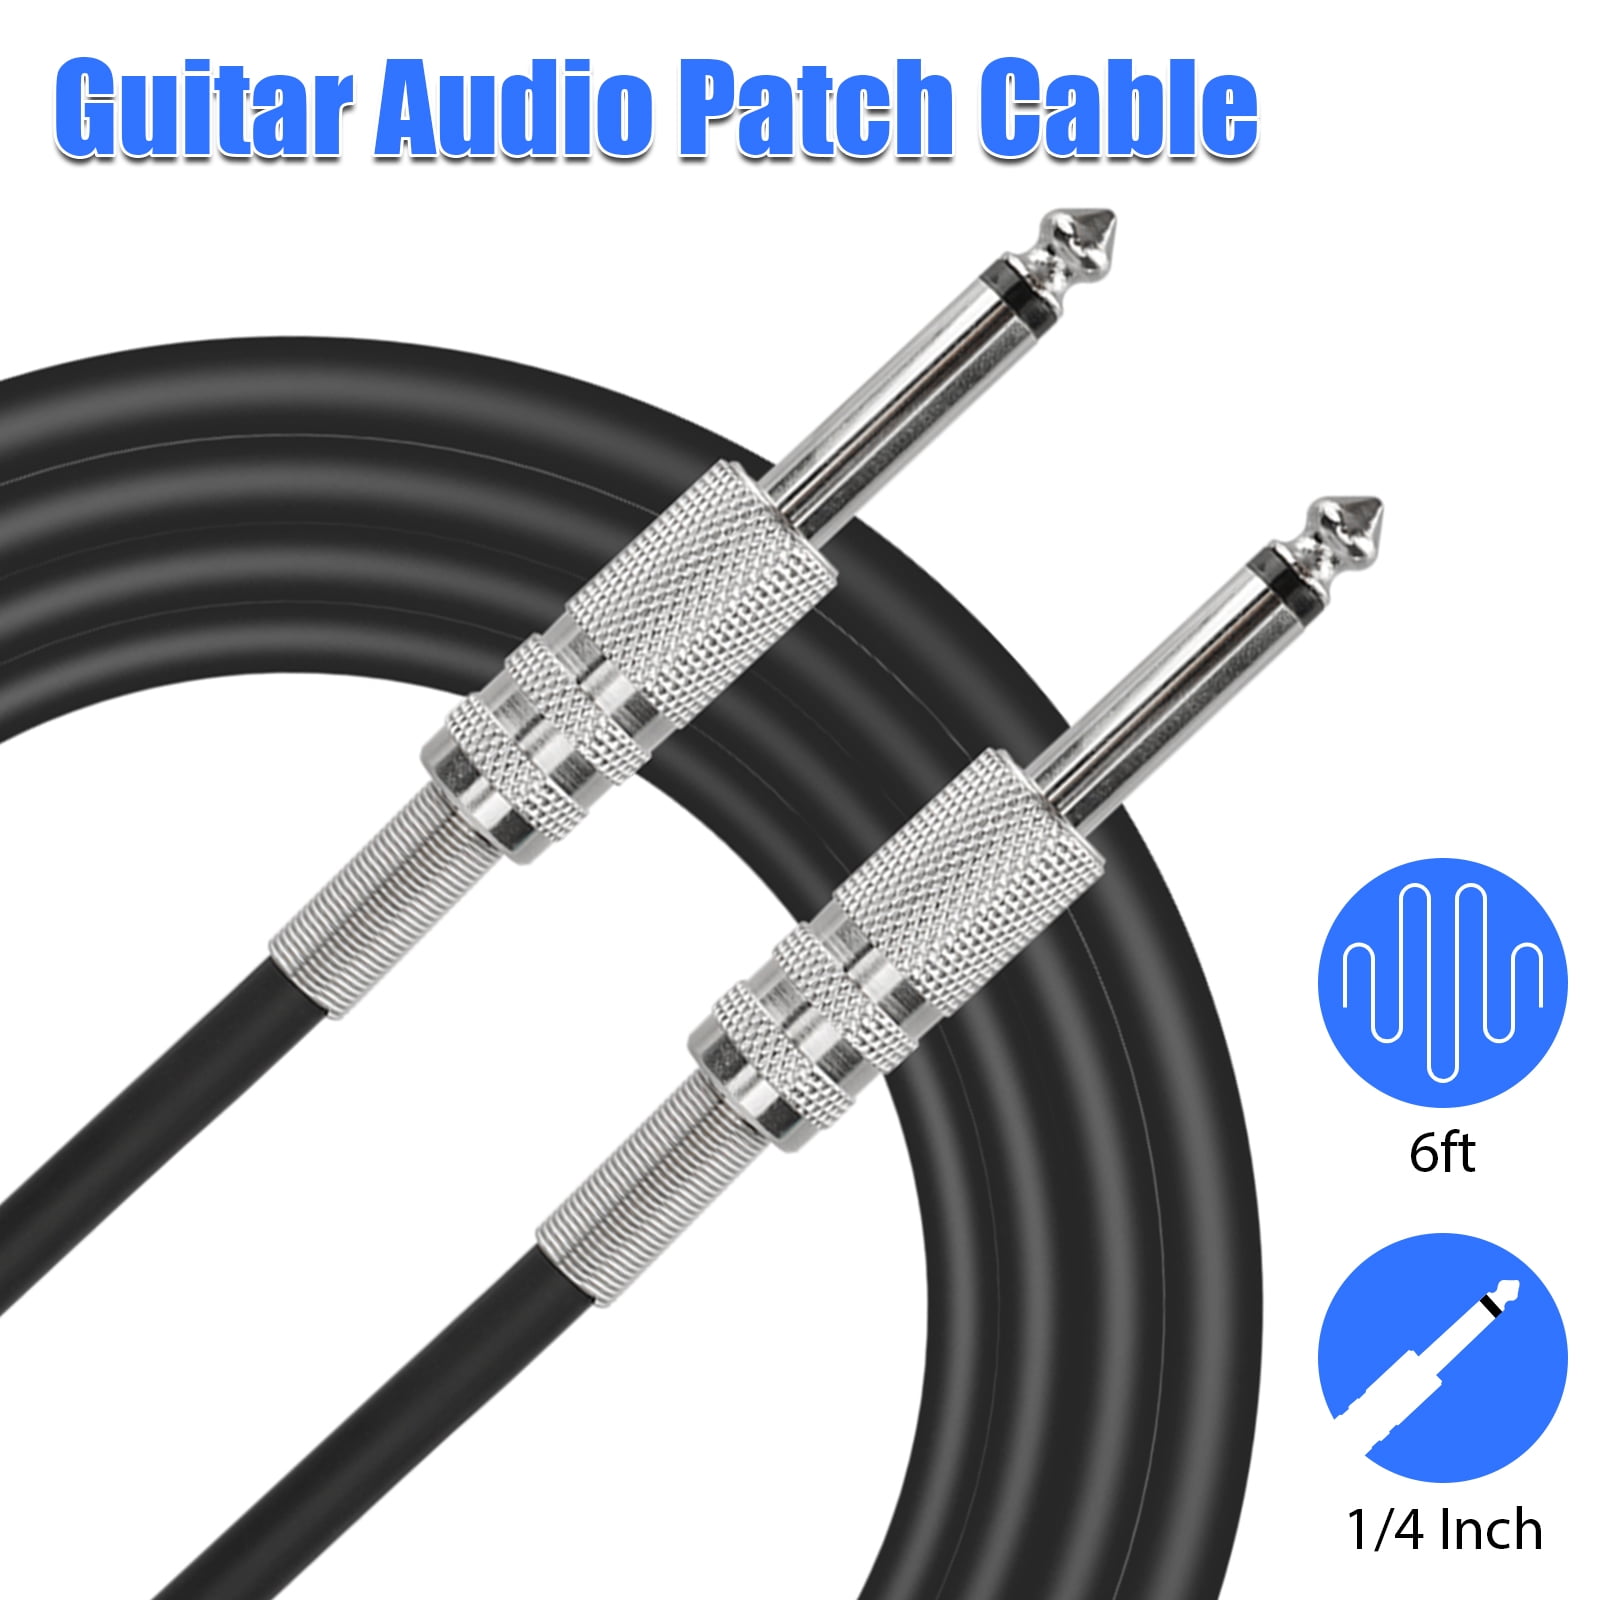 20 feet Bass Guitar Cords Amp Cables for Electric Guitar Cable Amp Right Angle 